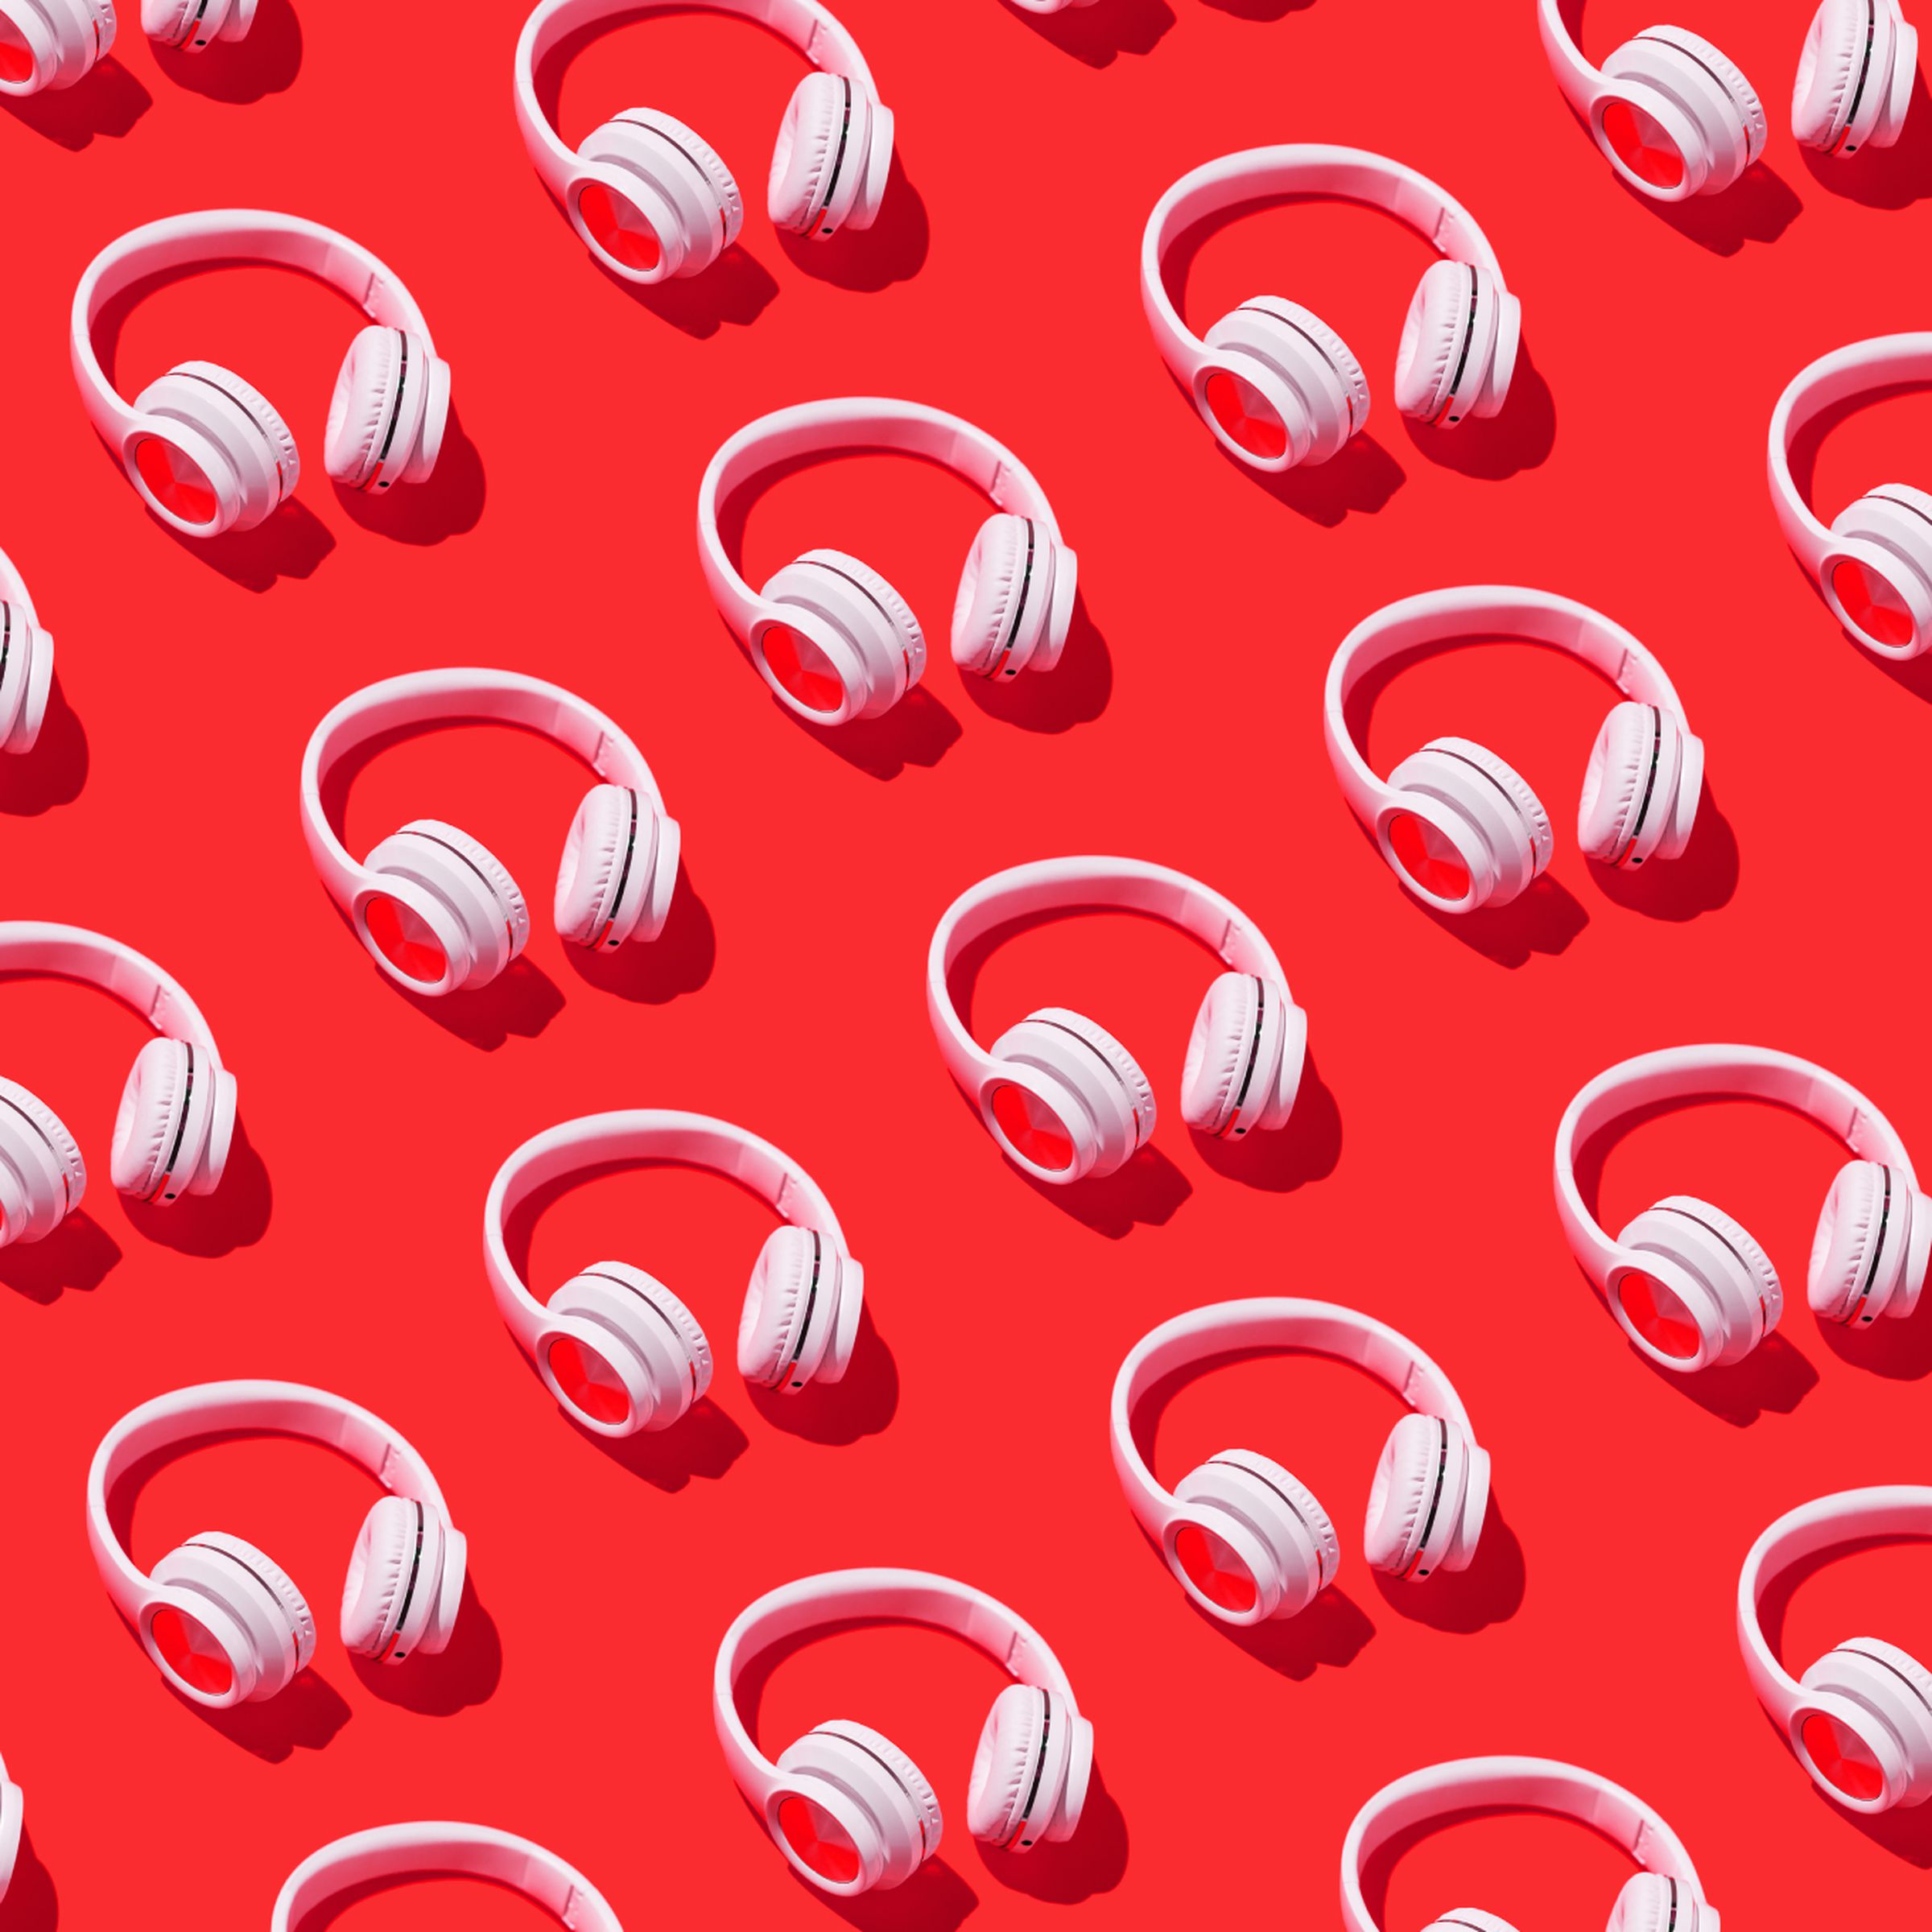 Red background with a repeating pattern of white headphones.